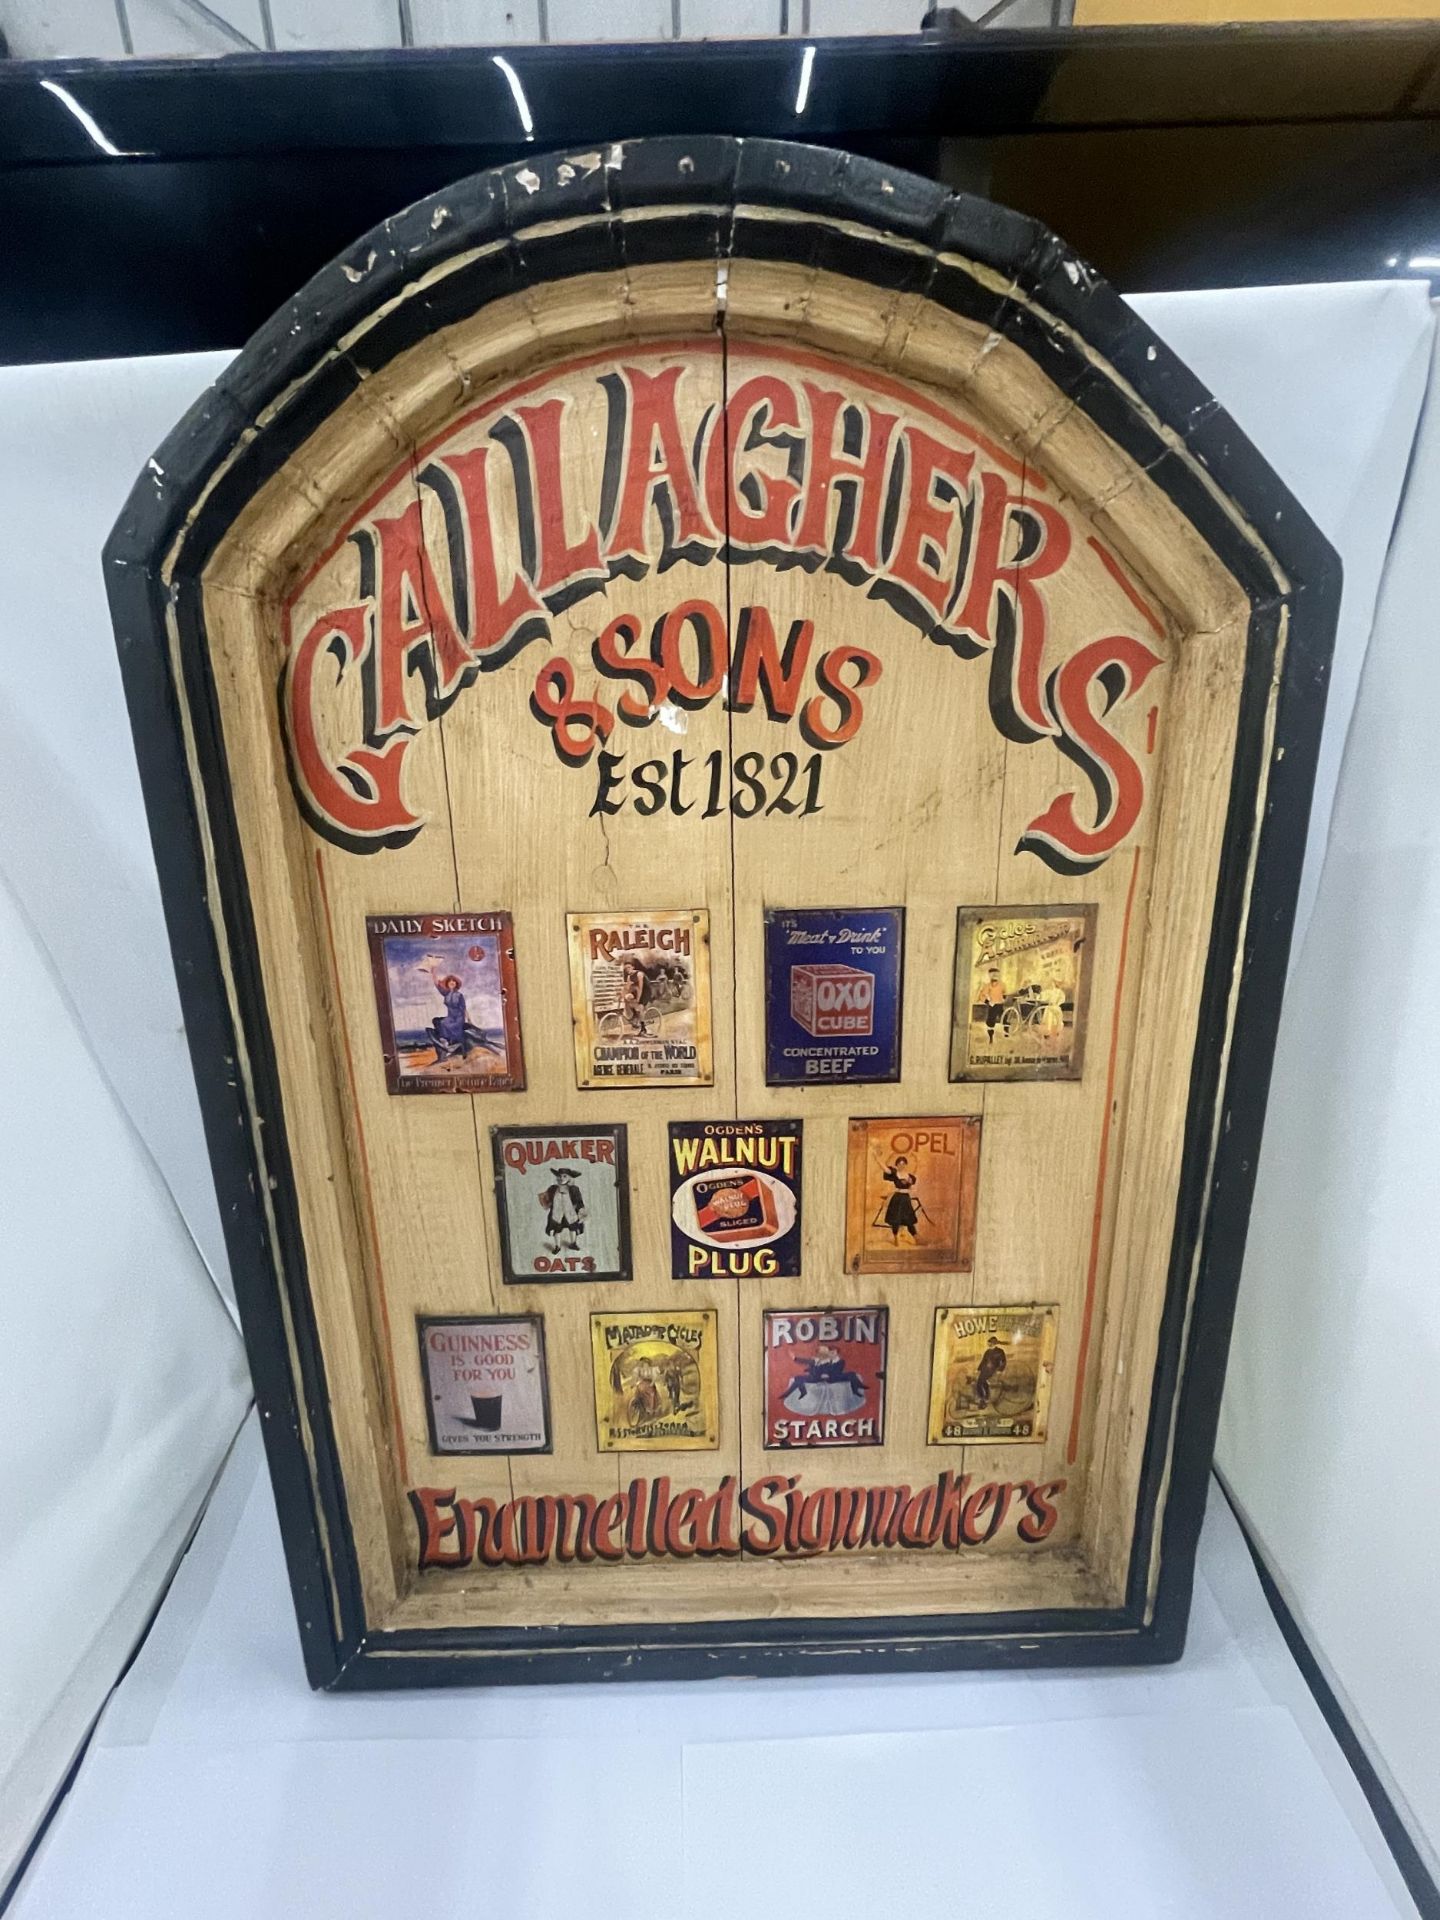 A VINTAGE GALLAGHERS & SONS WOODEN SIGN